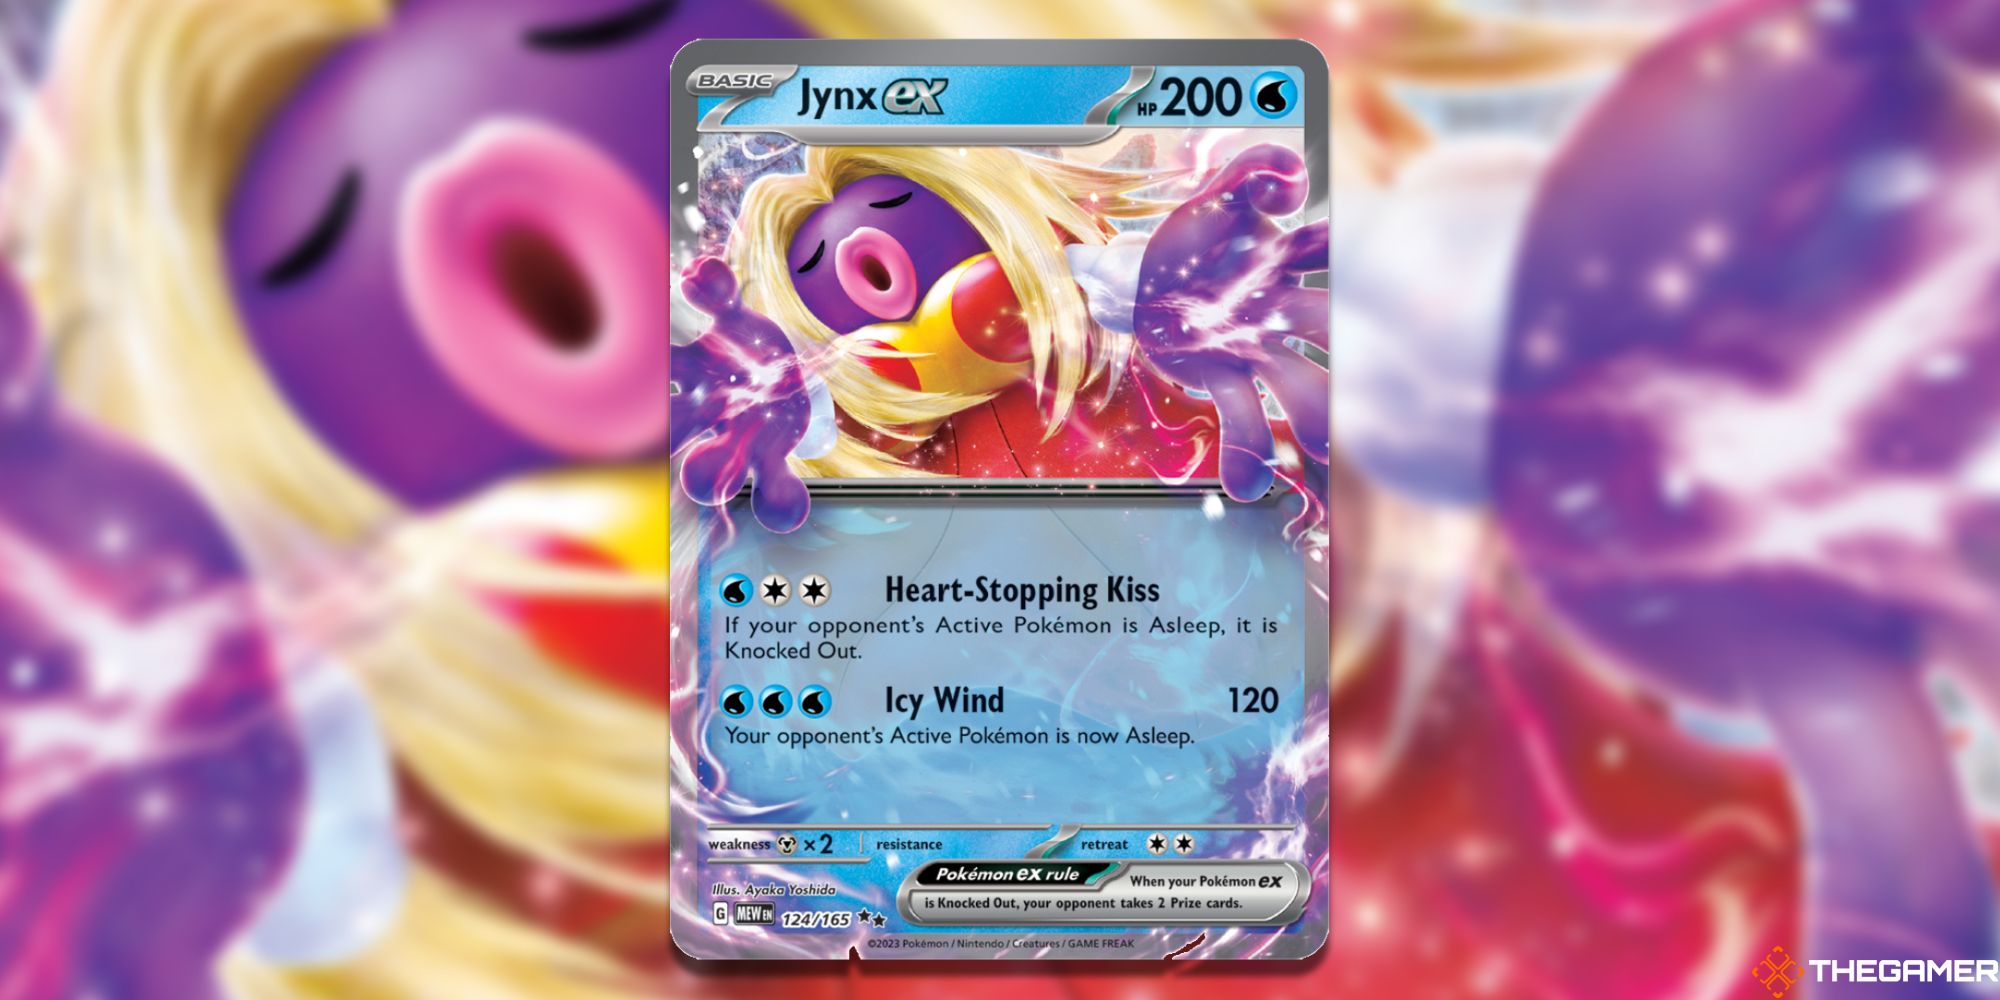 Image of the Jynx ex card in Magic: The Gathering, with art by Ayako Yoshida